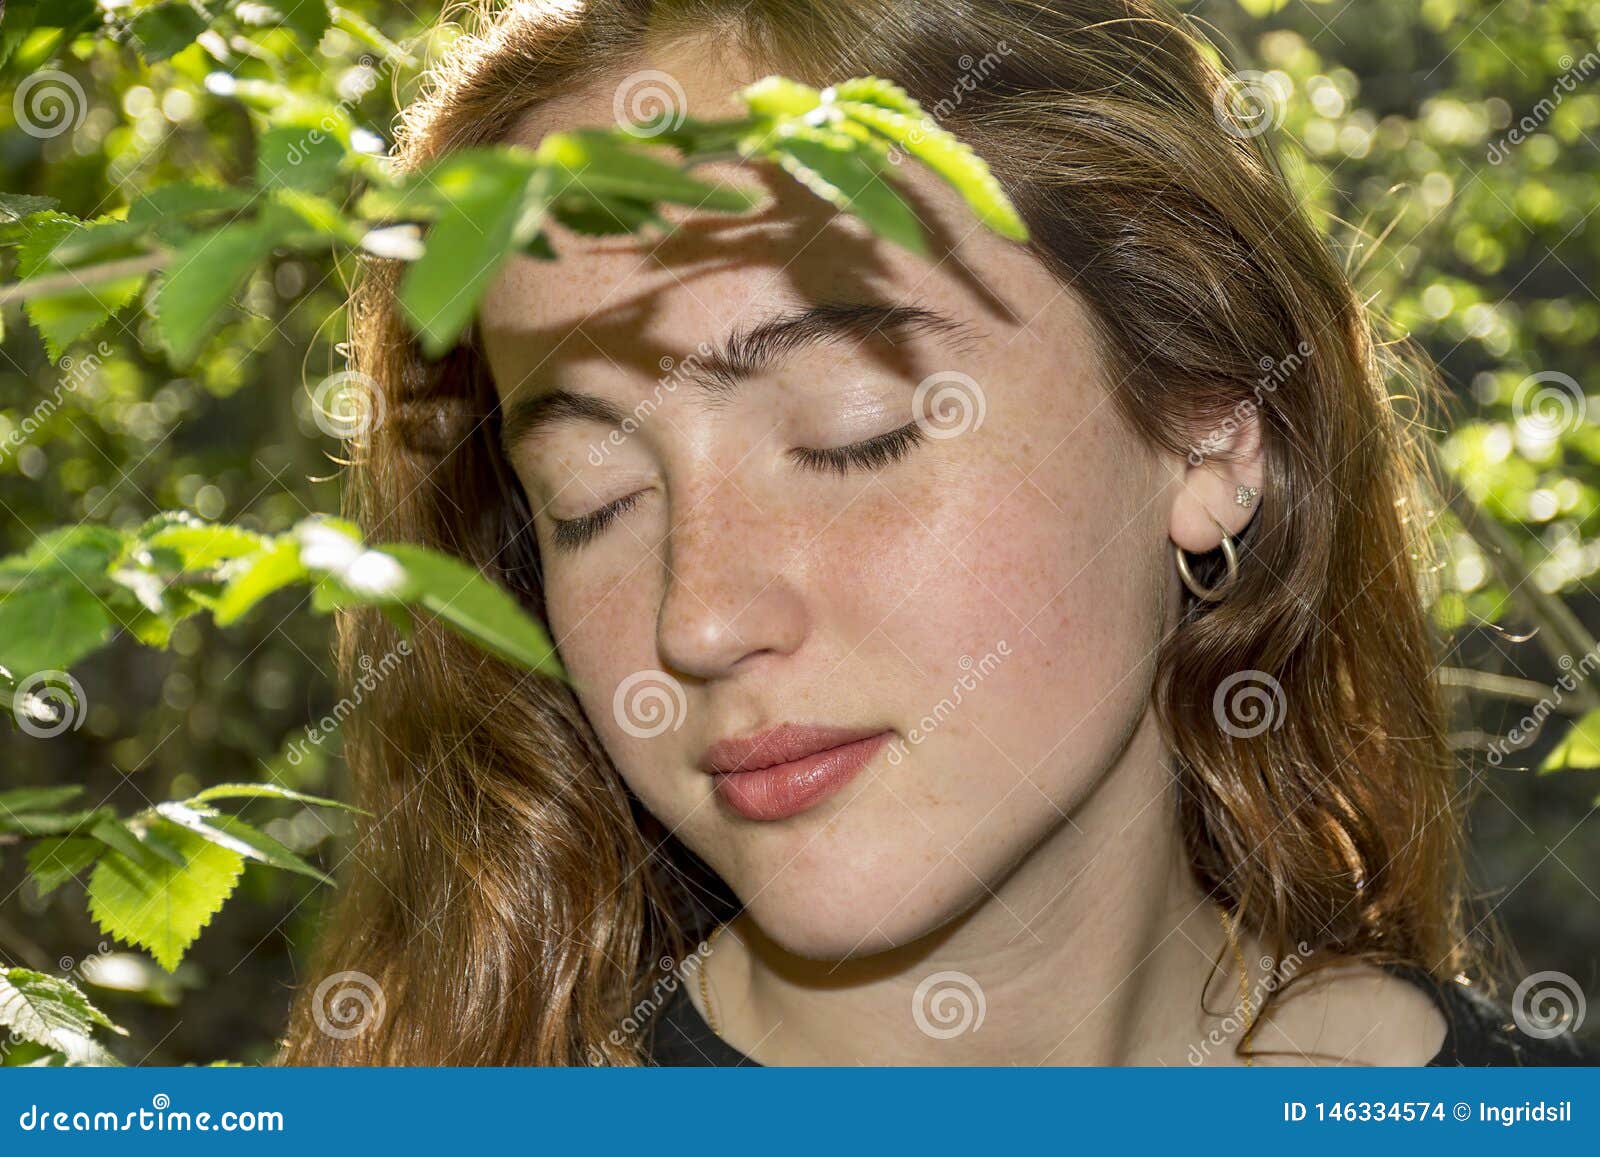 young red-haired caucasian woman with freckles with close eyes into a forest.